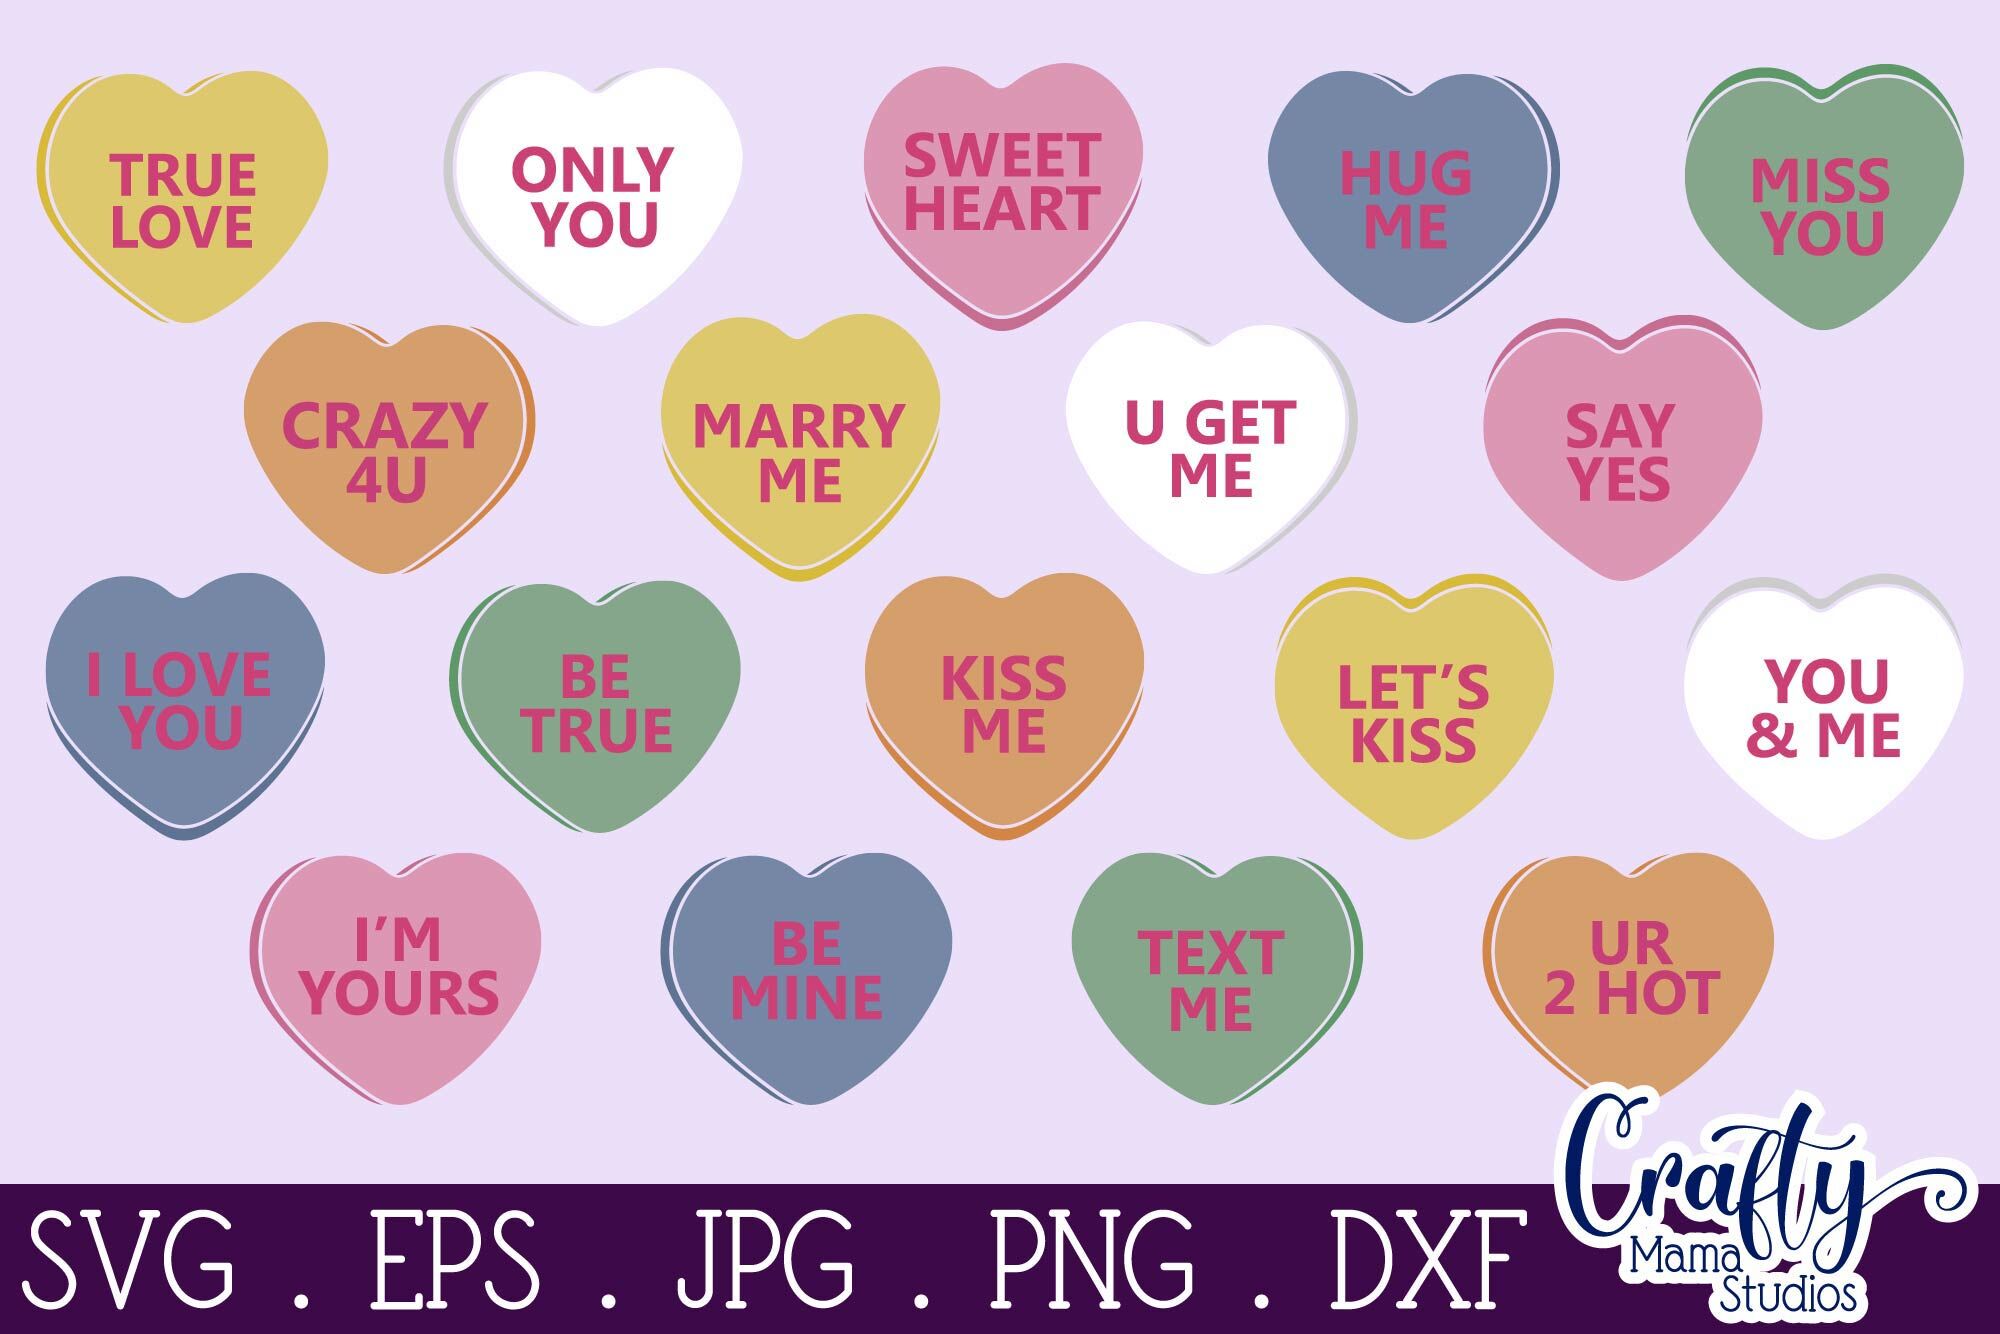 Conversation Hearts Svg, Valentine's Day, Love Quotes By Crafty Mama